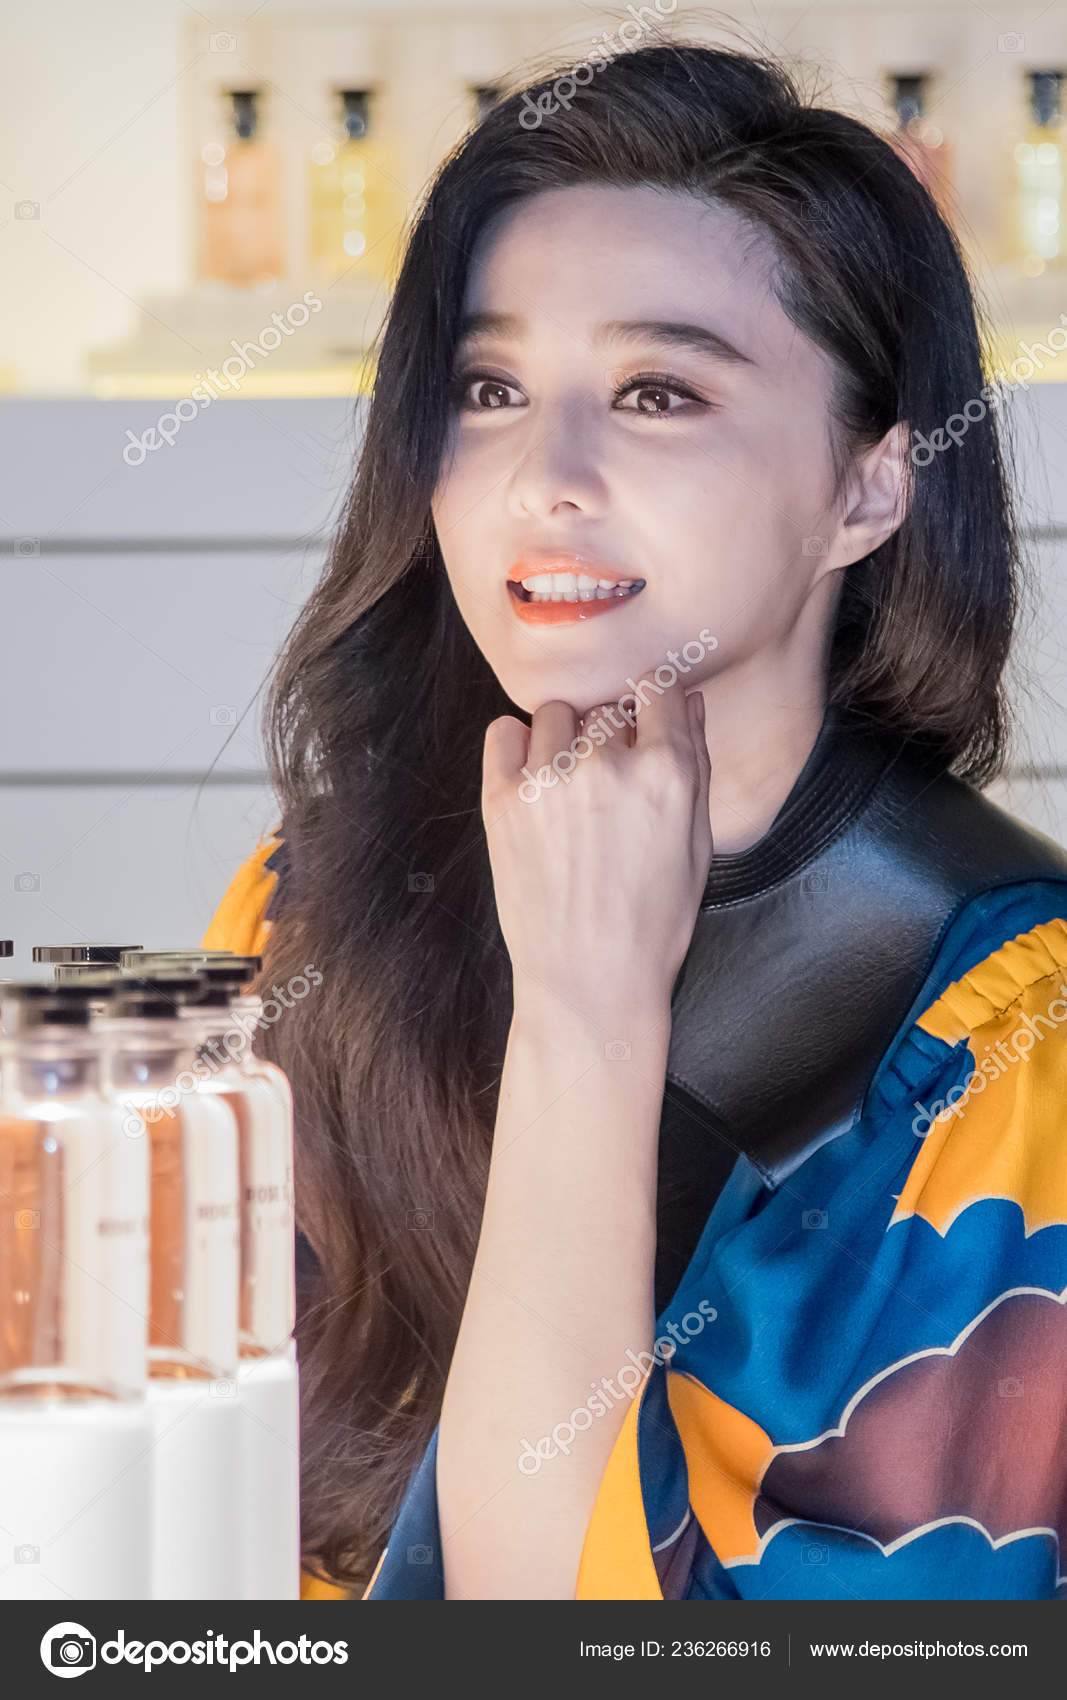 Chinese Actress Fan Bingbing Attends Launch Event Louis Vuitton Perfume –  Stock Editorial Photo © ChinaImages #236259470